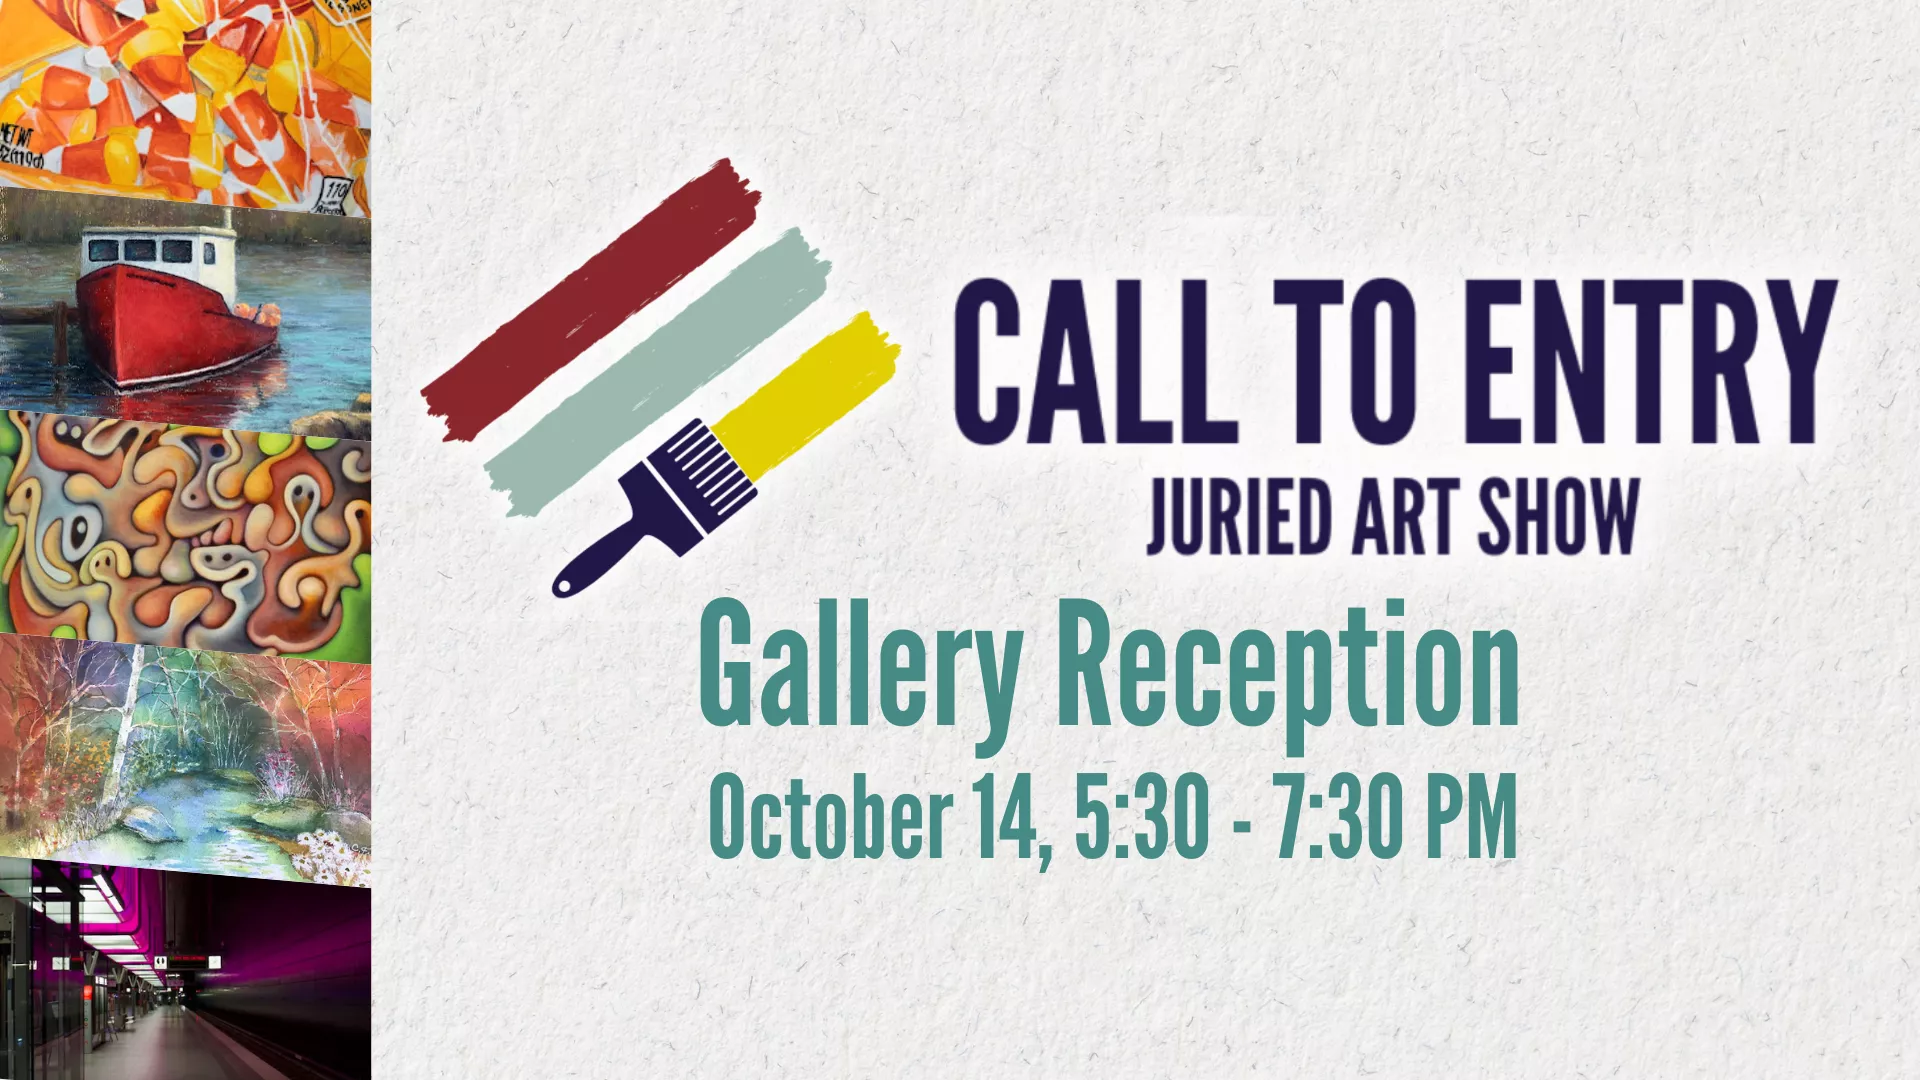 Call to Entry Juried Art Show gallery reception, October 14, 5:30 - 7:30 PM